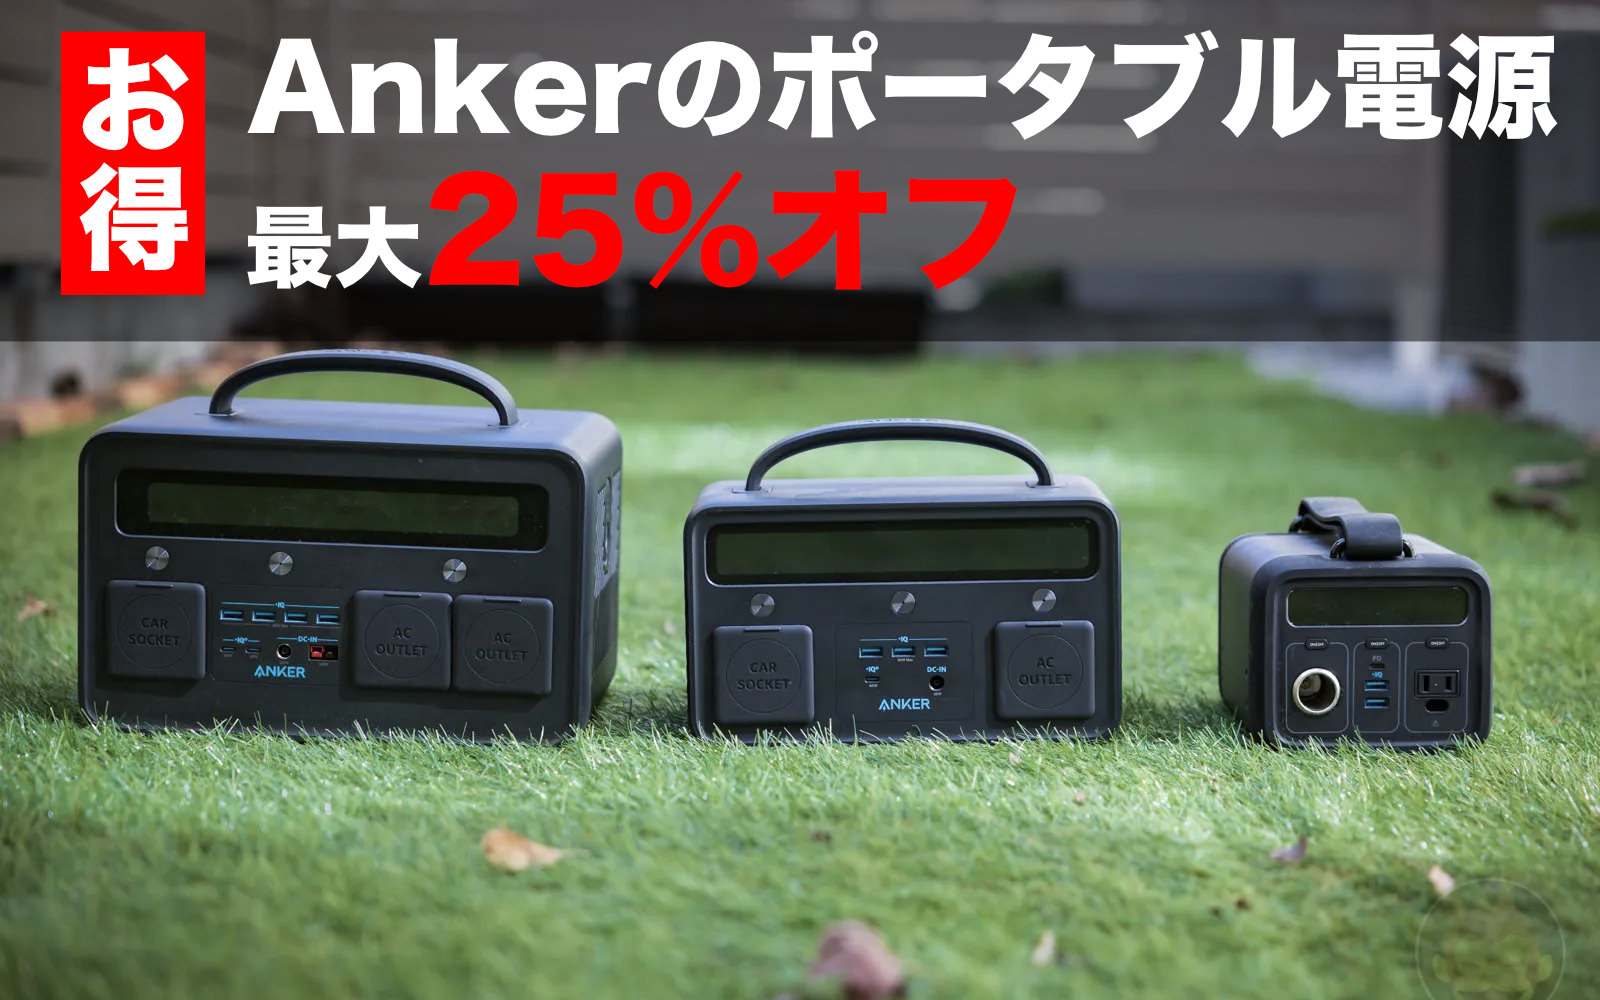 Anker Portable Battery on sale